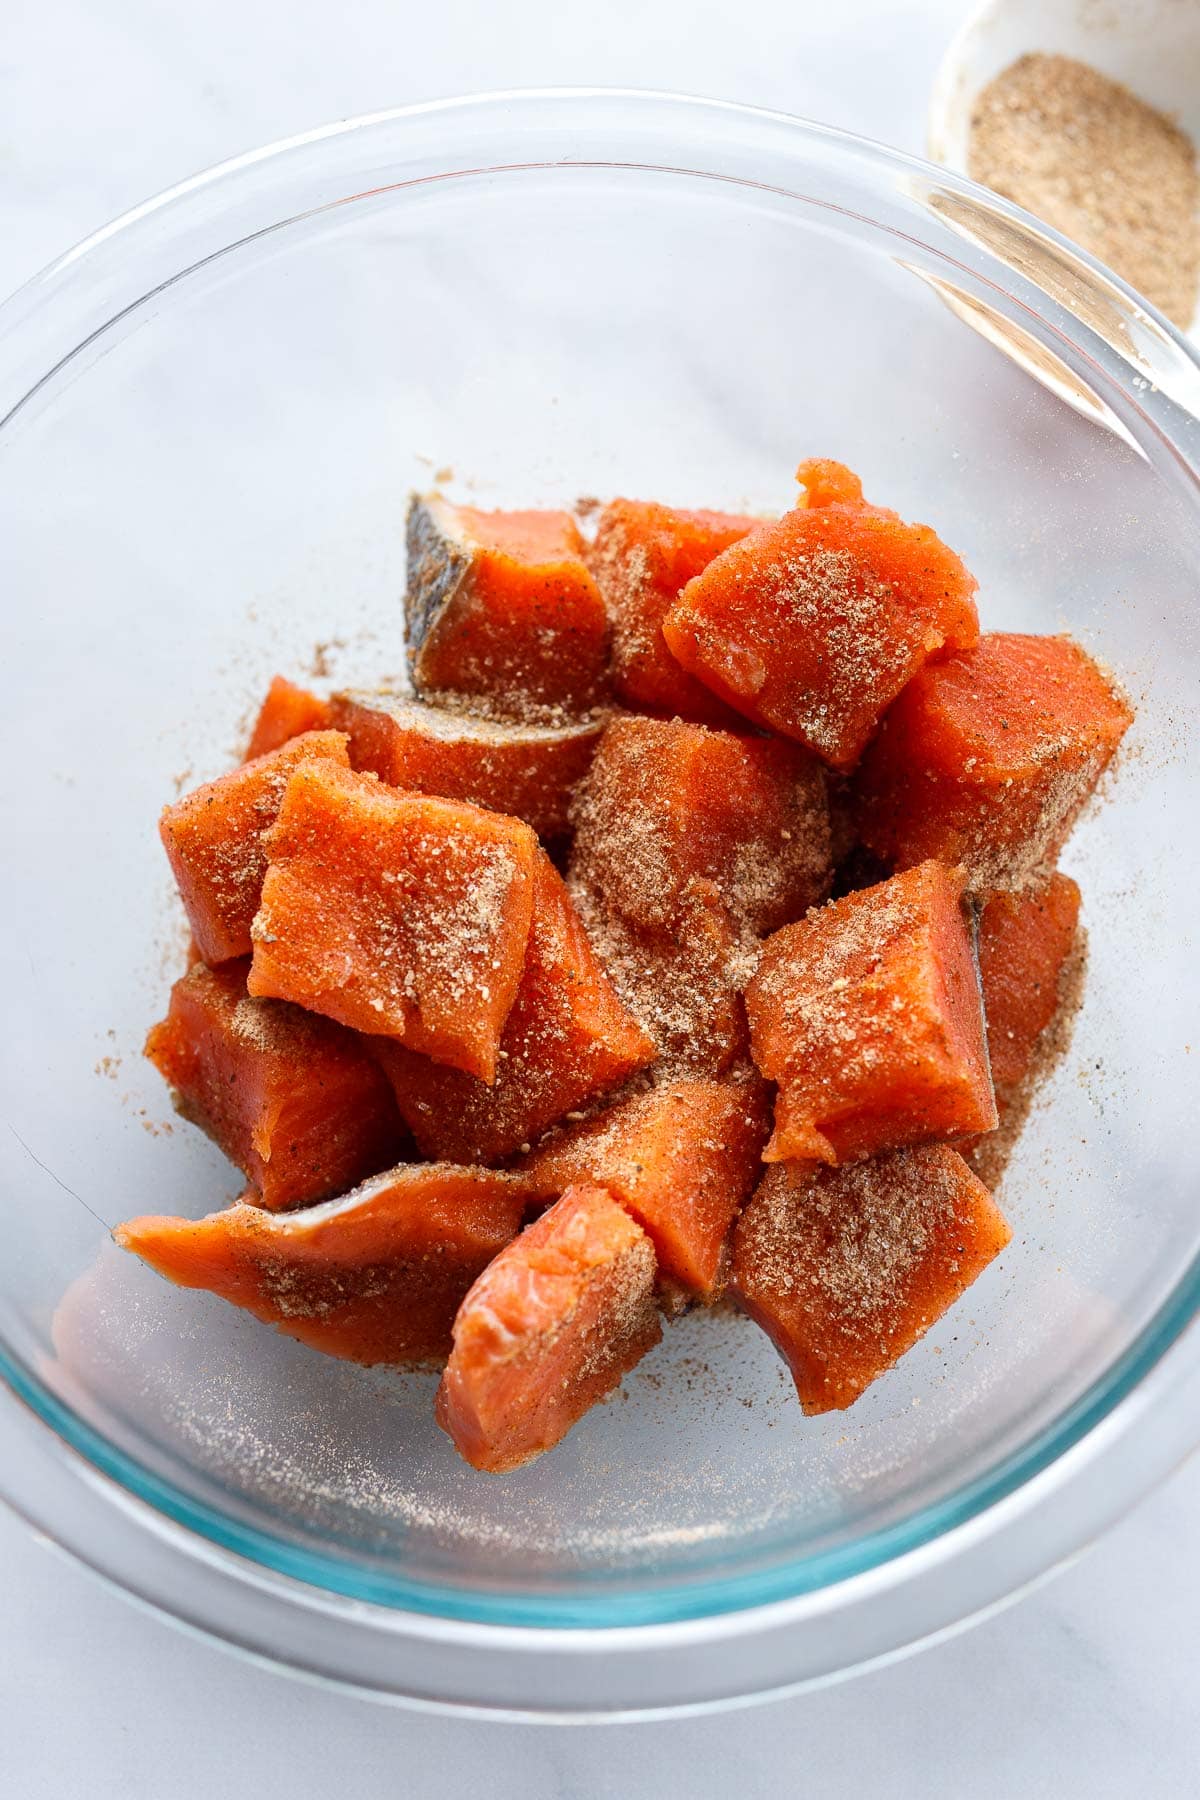 Spiced salmon cubes in a bowl.